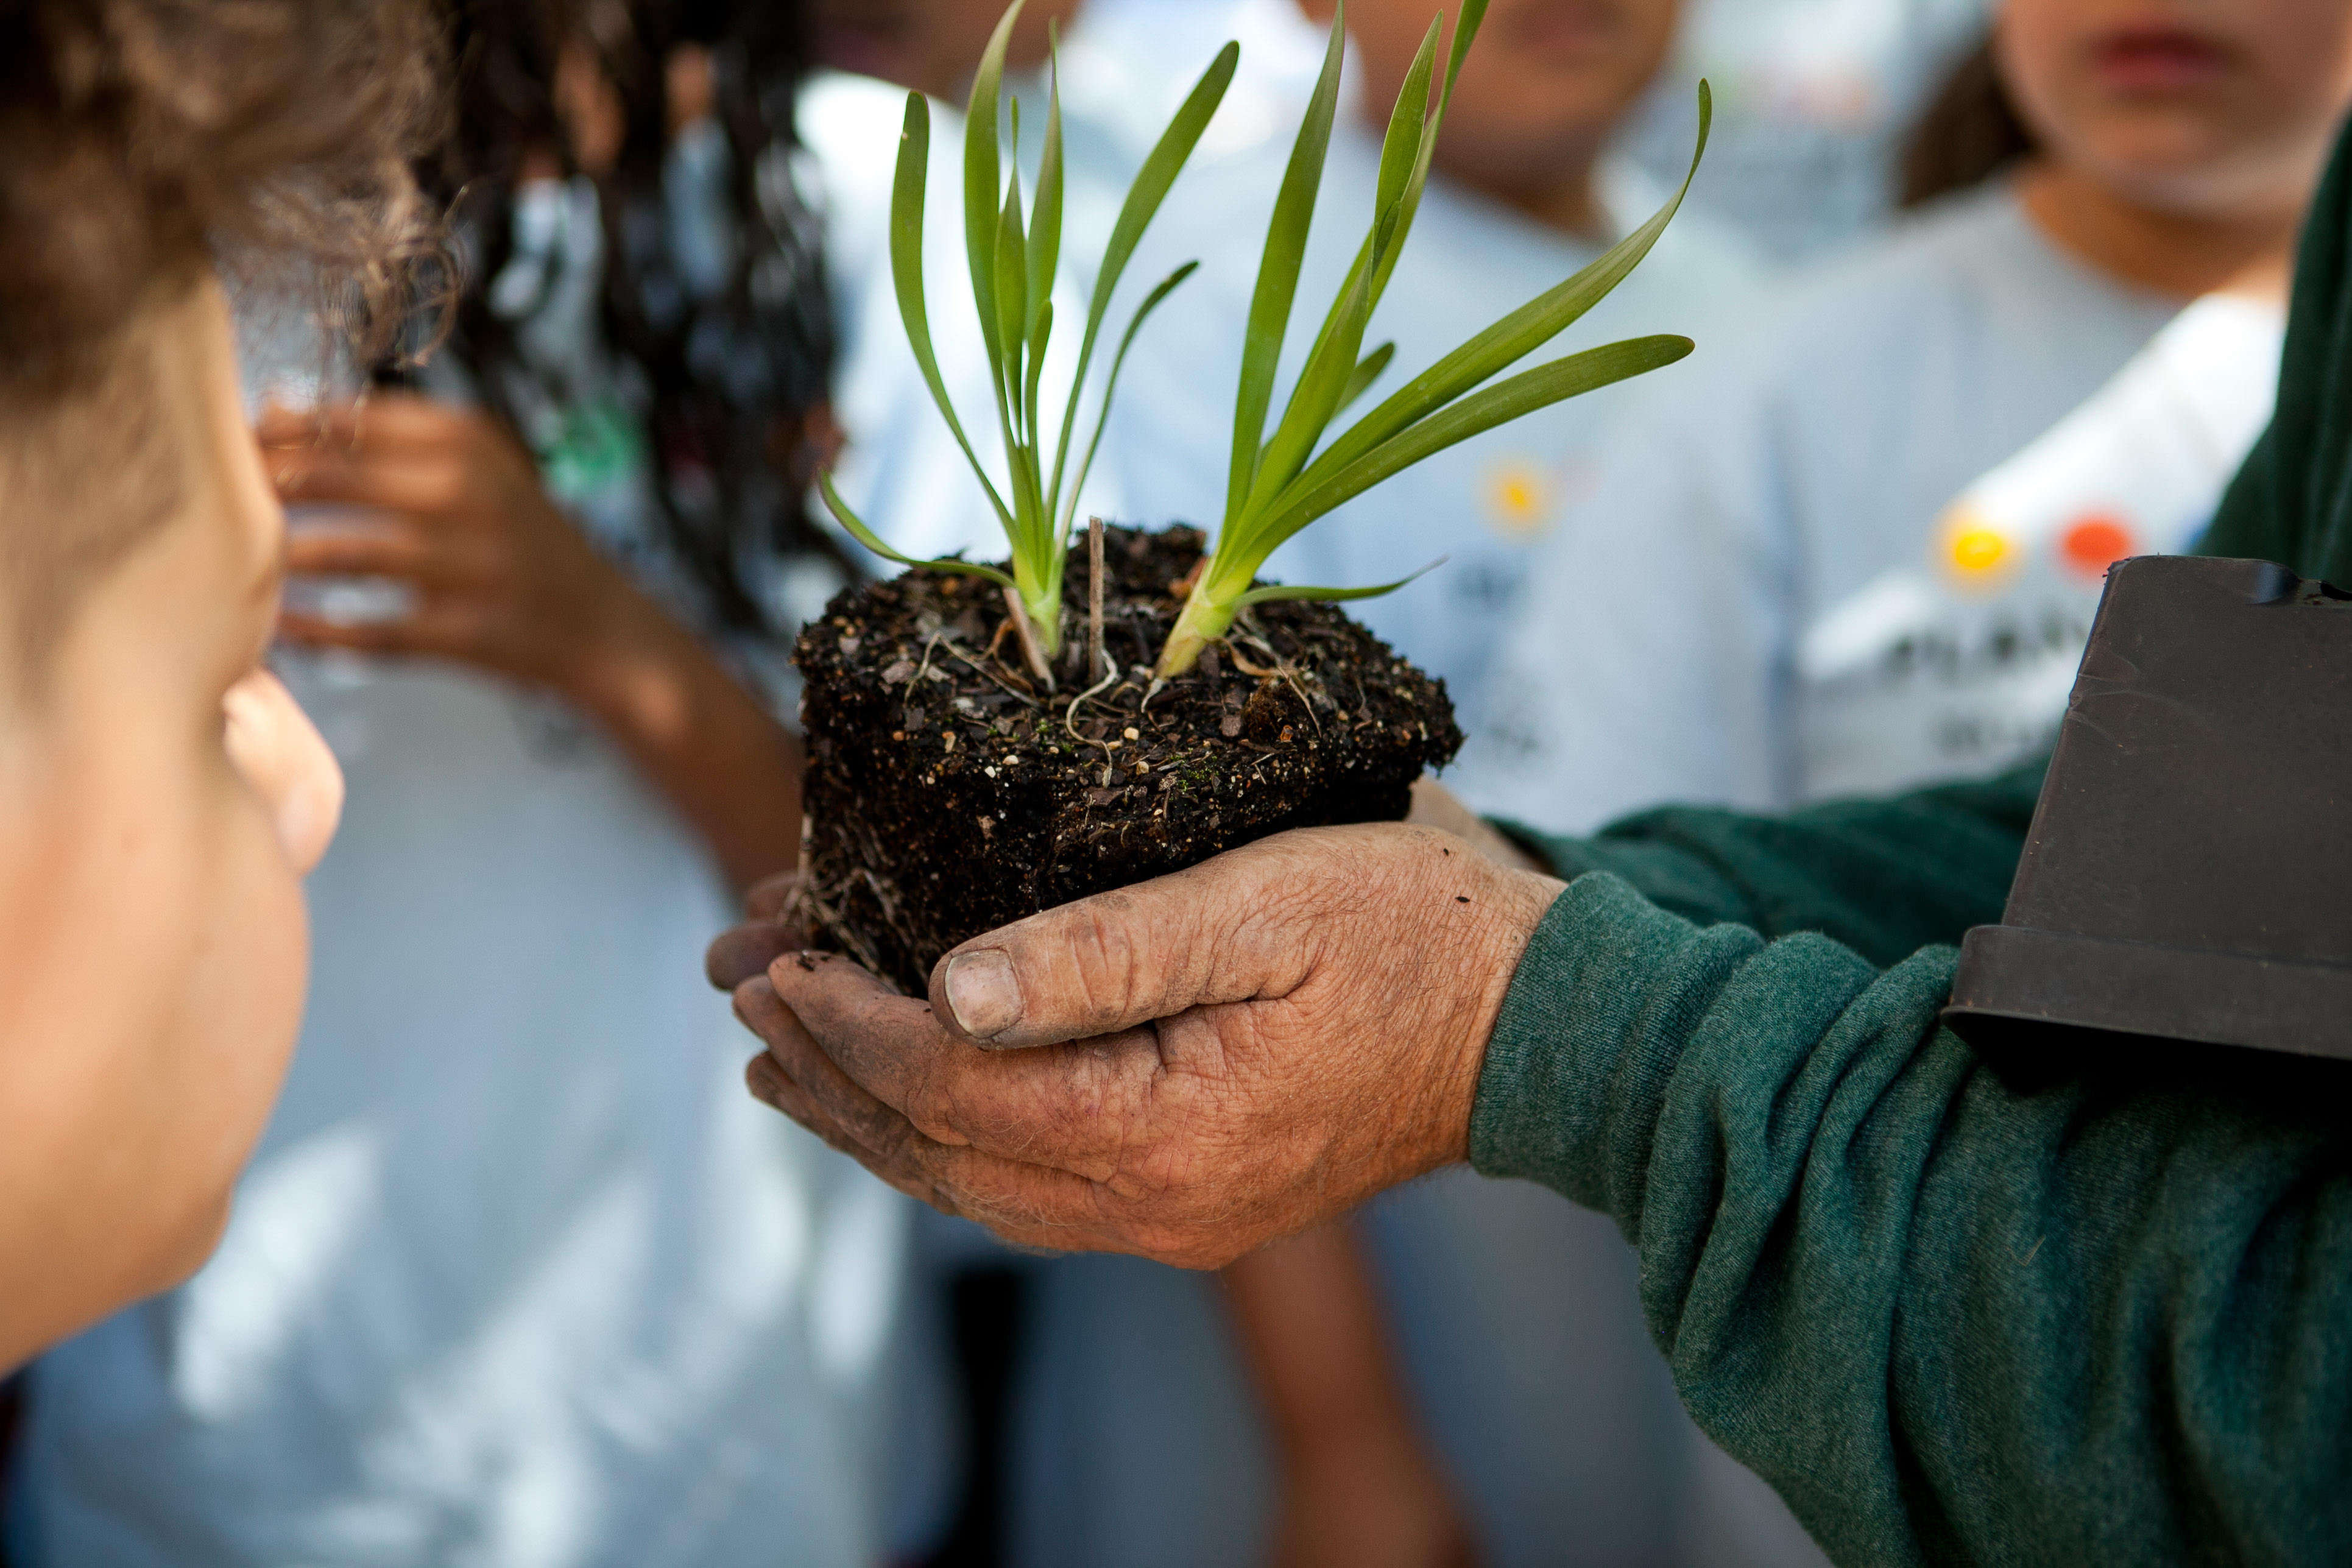 Cupped hands holding soil containing a sprouting plant.